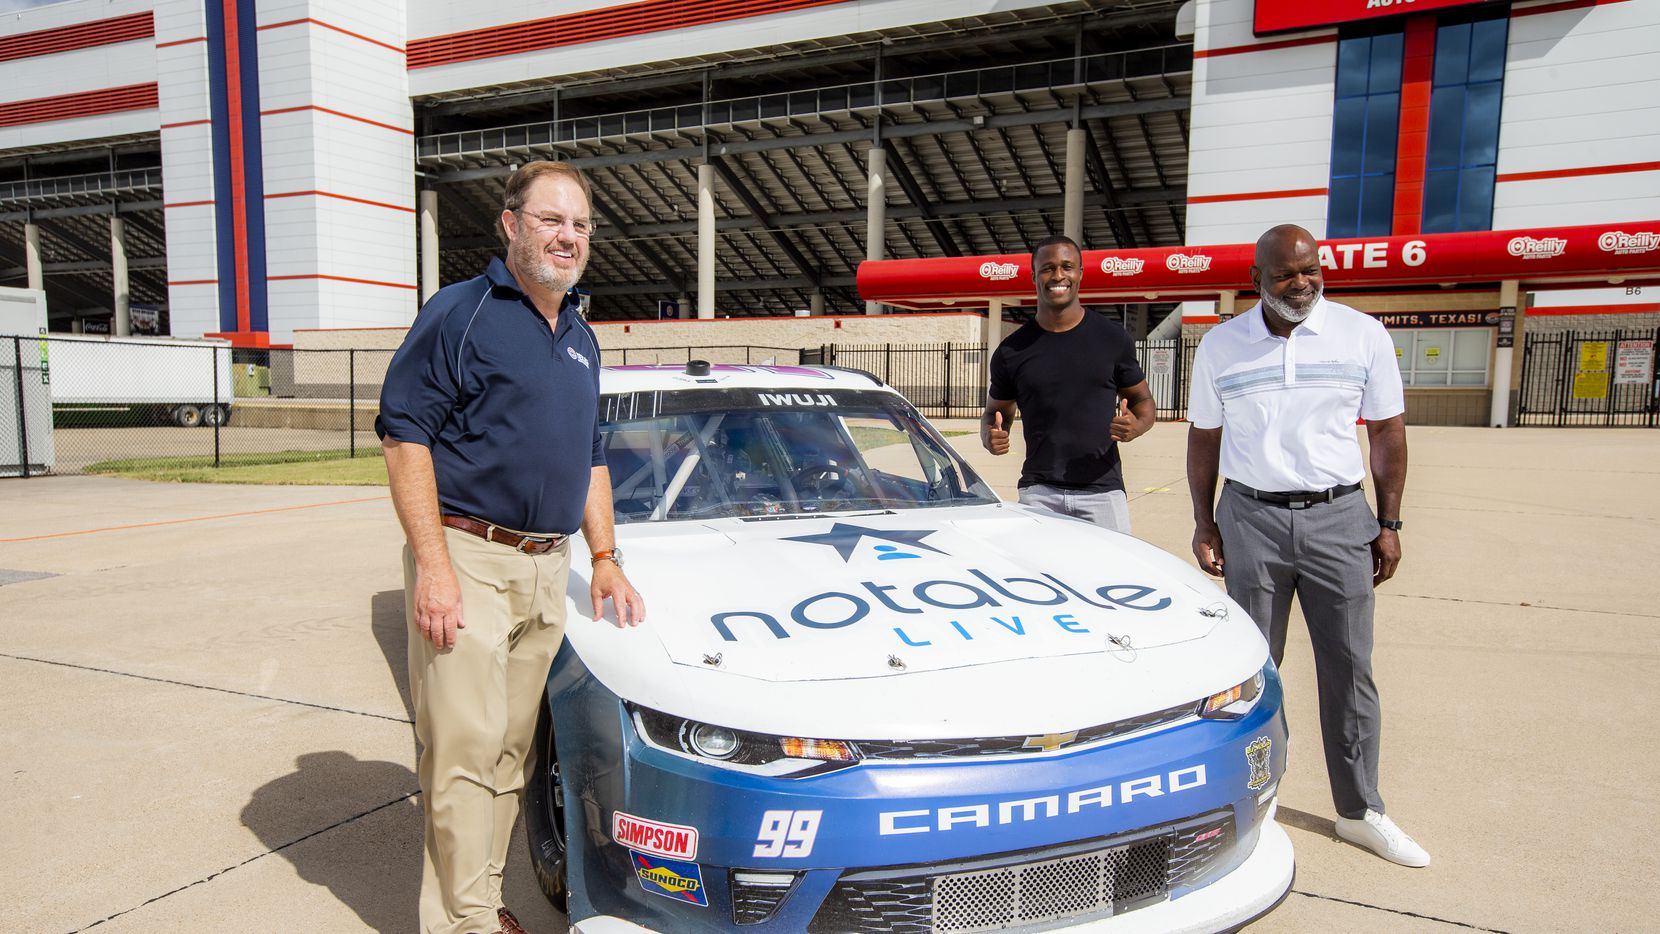 Texas Motor Speedway president Eddie Gossage, former Cowboy Emmitt Smith and Jesse Iwuji unveil Notable.Live paint scheme on No. 99 B.J. McLeod Motorsports Chevrolet for Oct. 24 NASCAR Xfinity Series O Reilly Auto Parts 300 at Texas Motor Speedway.Texas Motor Speedway President Eddie Gossage, left, NASCAR Driver Jesse Iwuji, center, and former Dallas Cowboys running back and NASCAR team sponsor Emmitt Smith, right, unveil Iwuji   s No 99 Notable Live Chevrolet car at Texas Motor Speedway on Thursday, October 22, 2020 in Fort Worth, Texas. (Brandon Wade/Getty Images for Texas Motor Speedway) ORG XMIT: 775580512